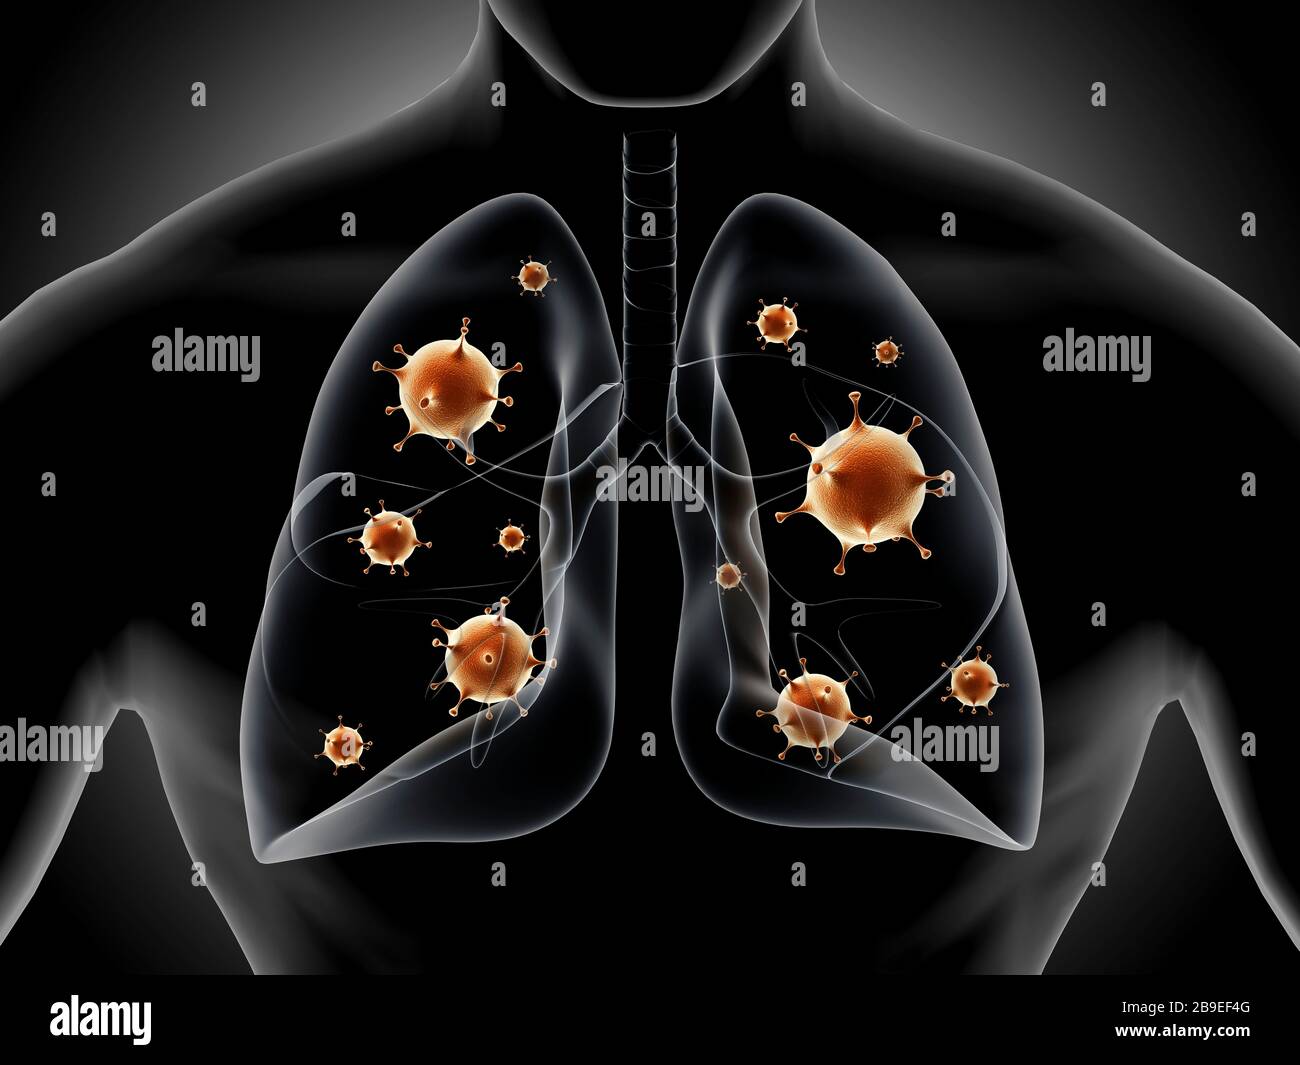 Medical illustration showing pneumonia in the human lungs. Stock Photo